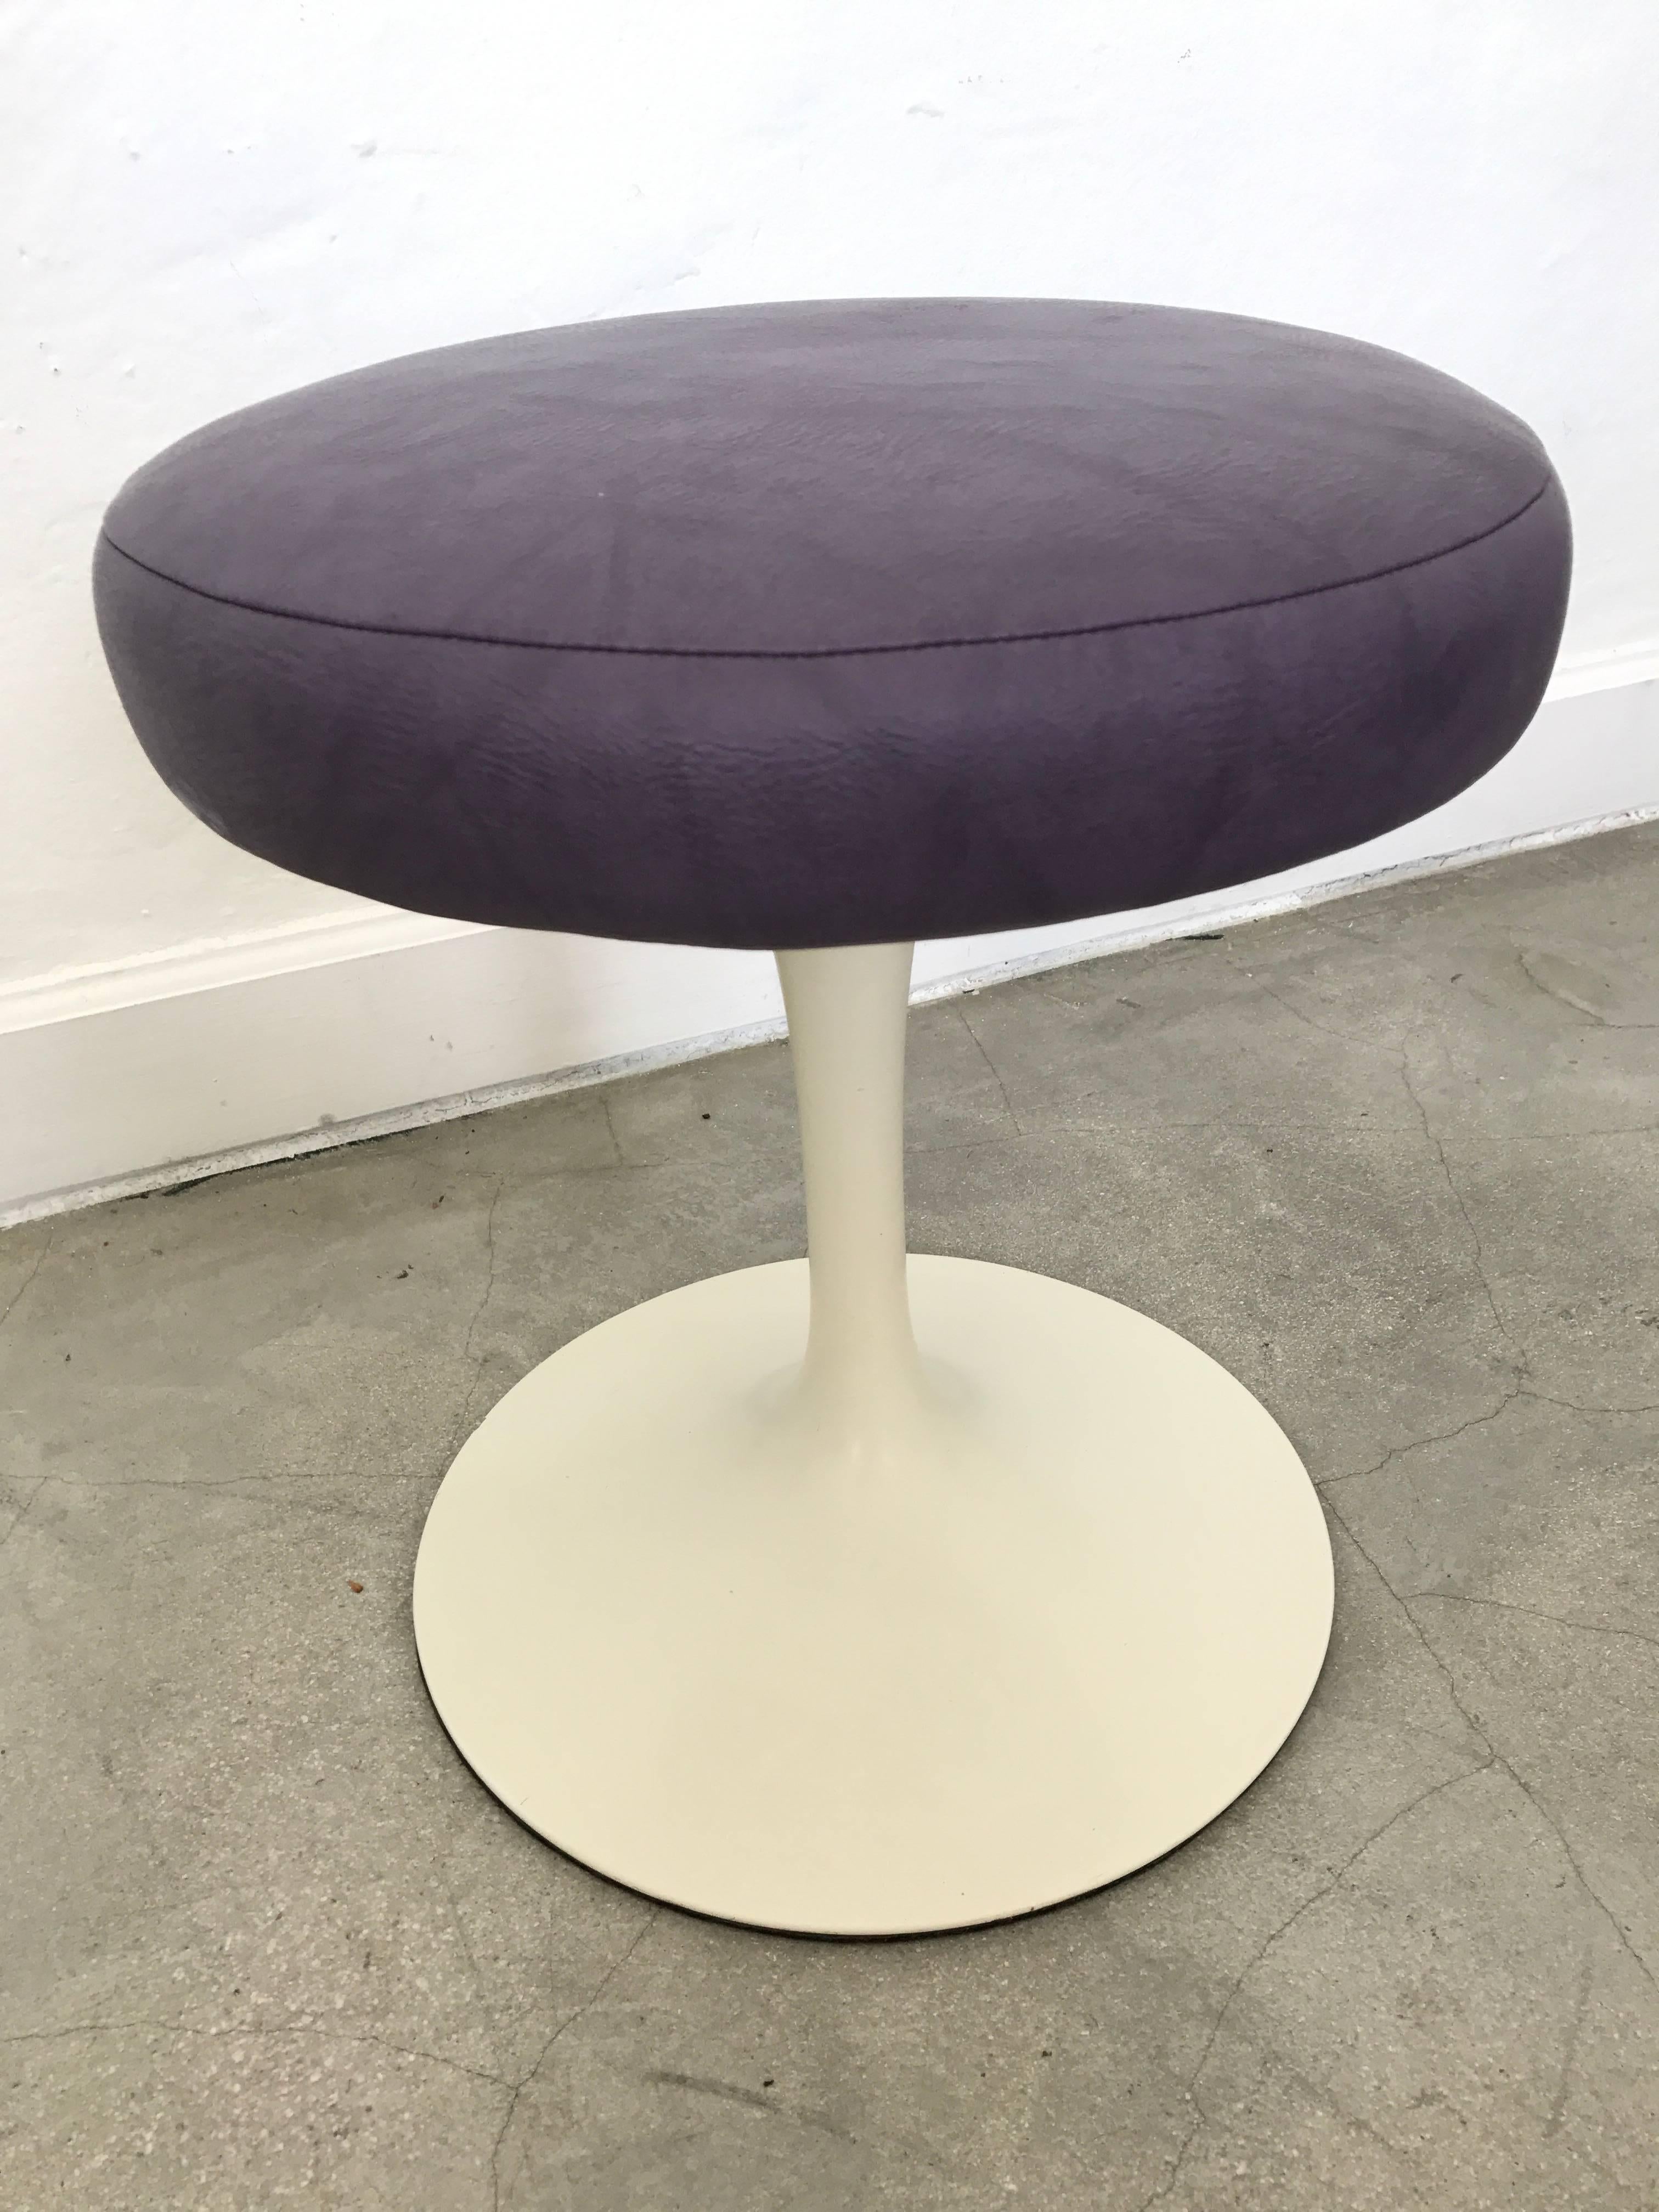 Original 1970s tulip swivel stool with purple leather and white tulip base by Eero Saarinen for Knoll.